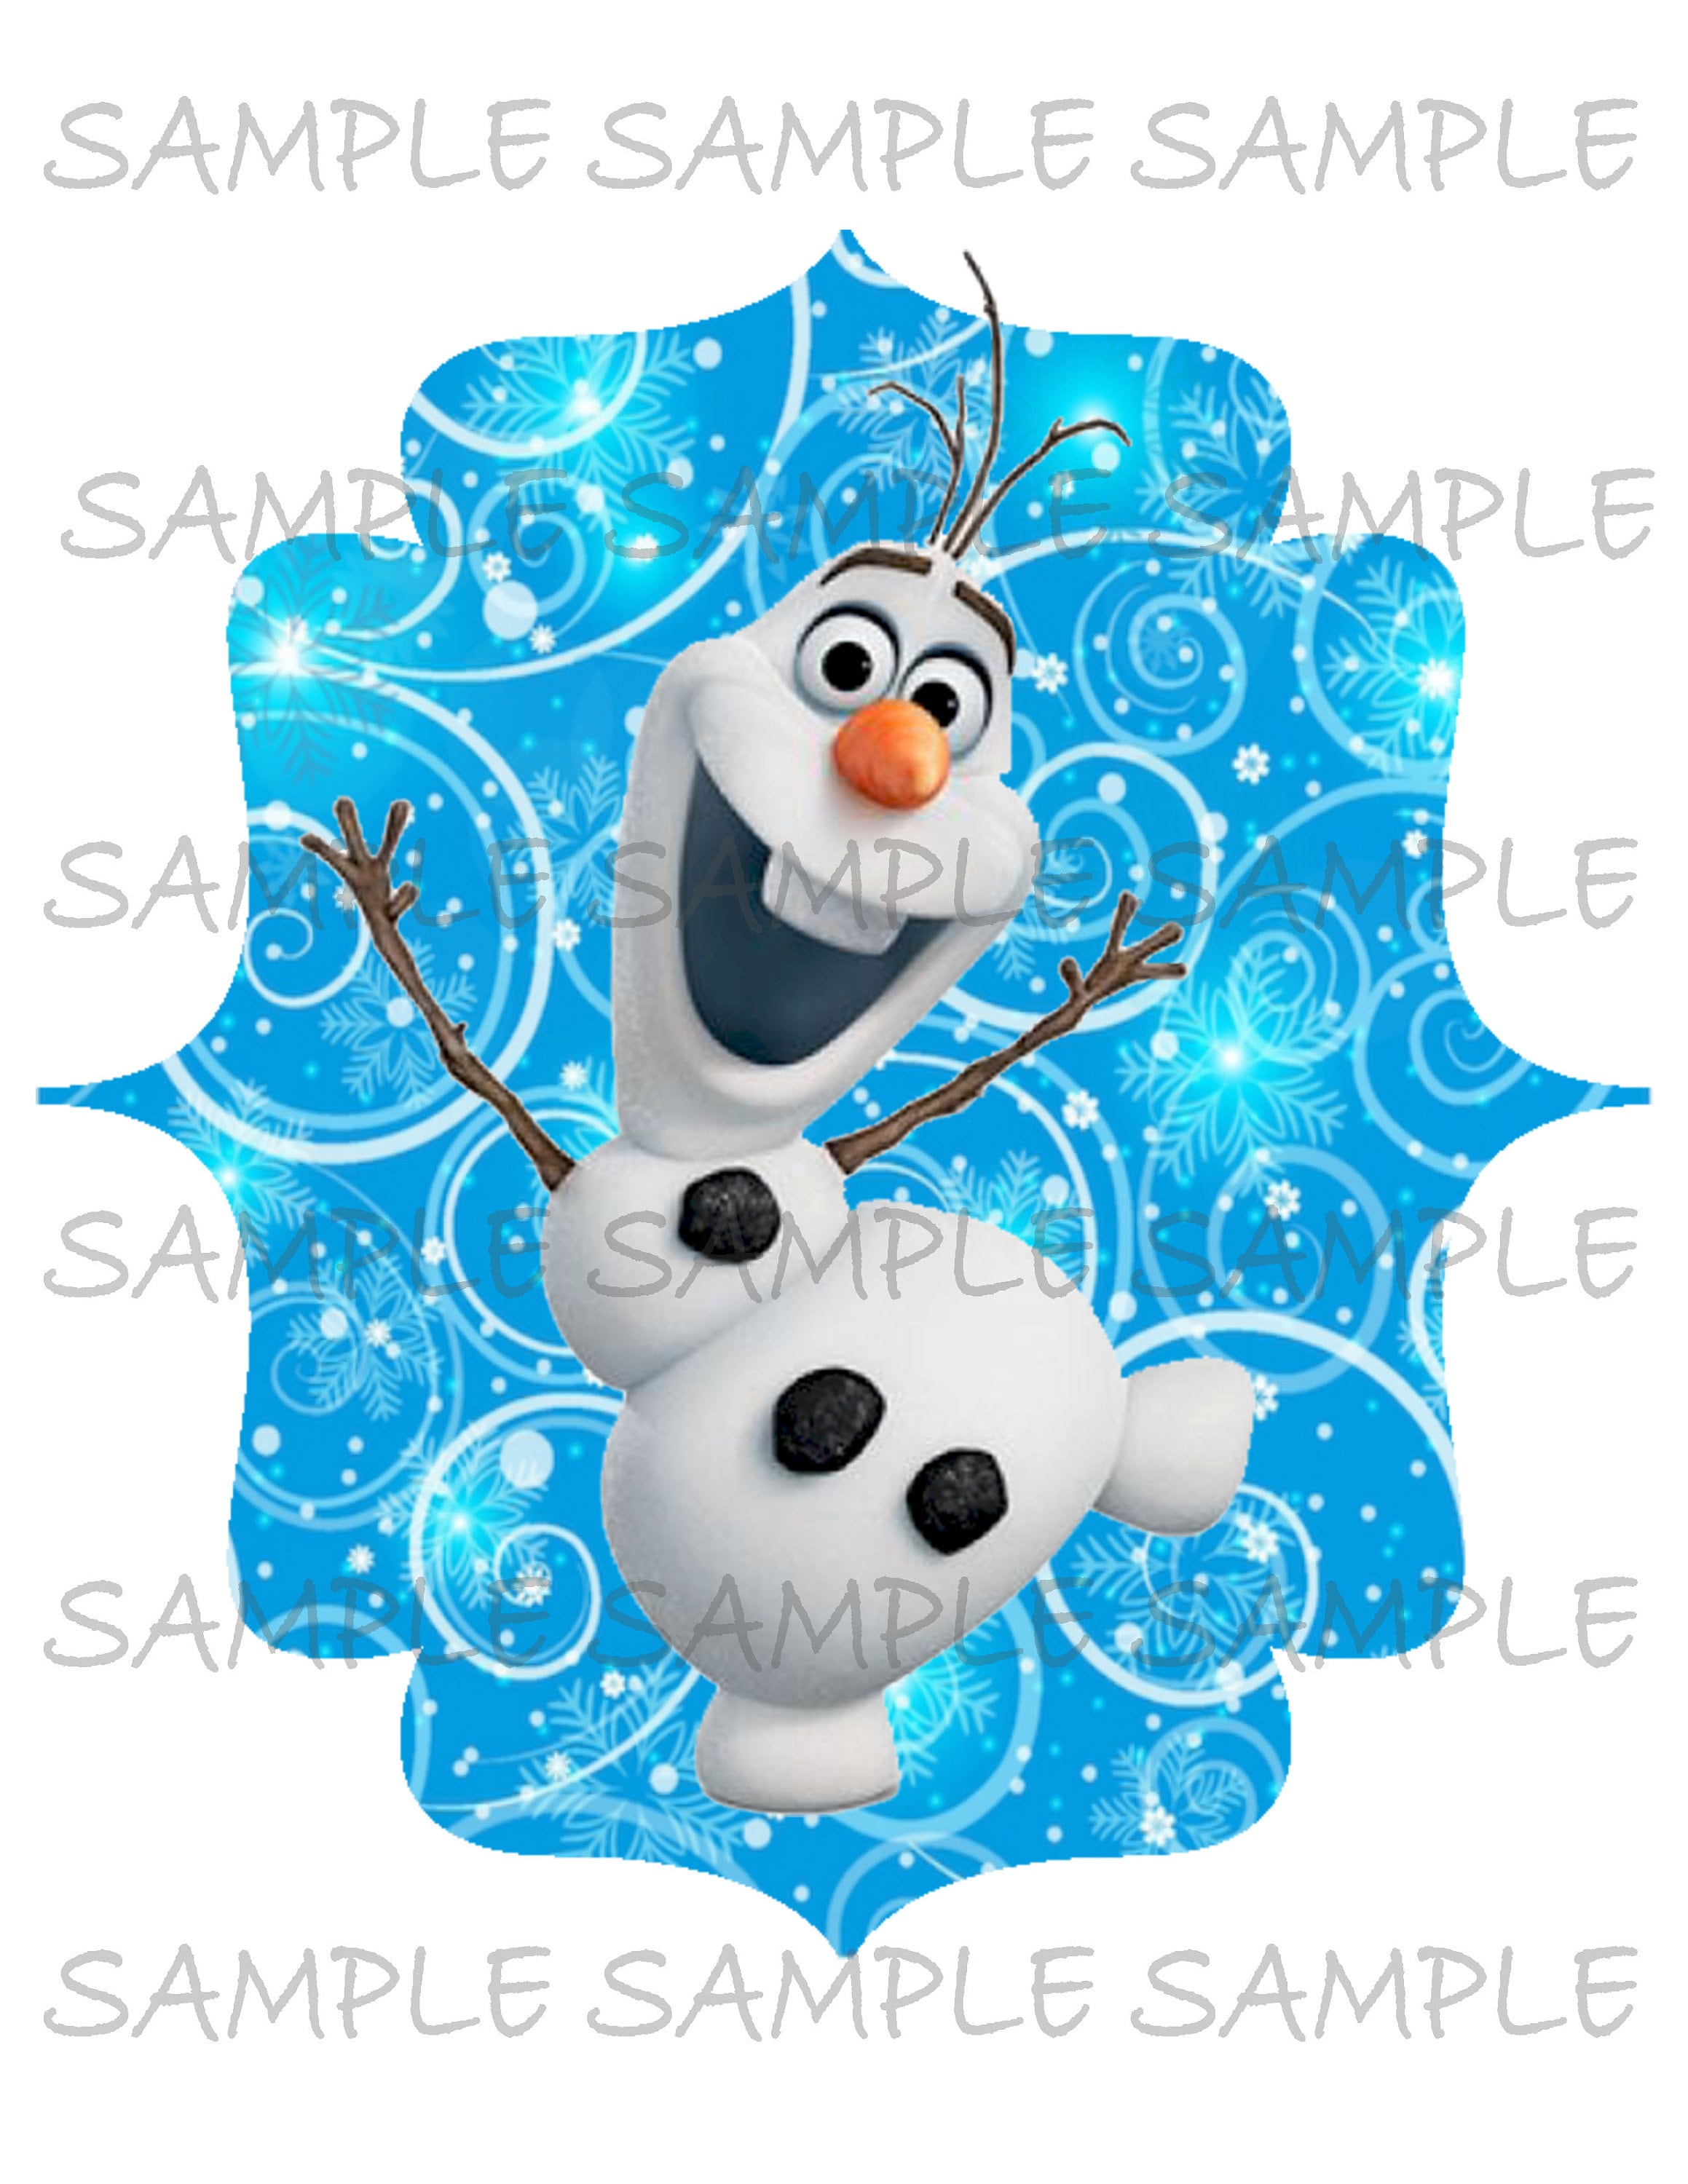 top Mam prieel Olaf Frozen on Blue Snowy Background IMAGE Printable Use as - Etsy